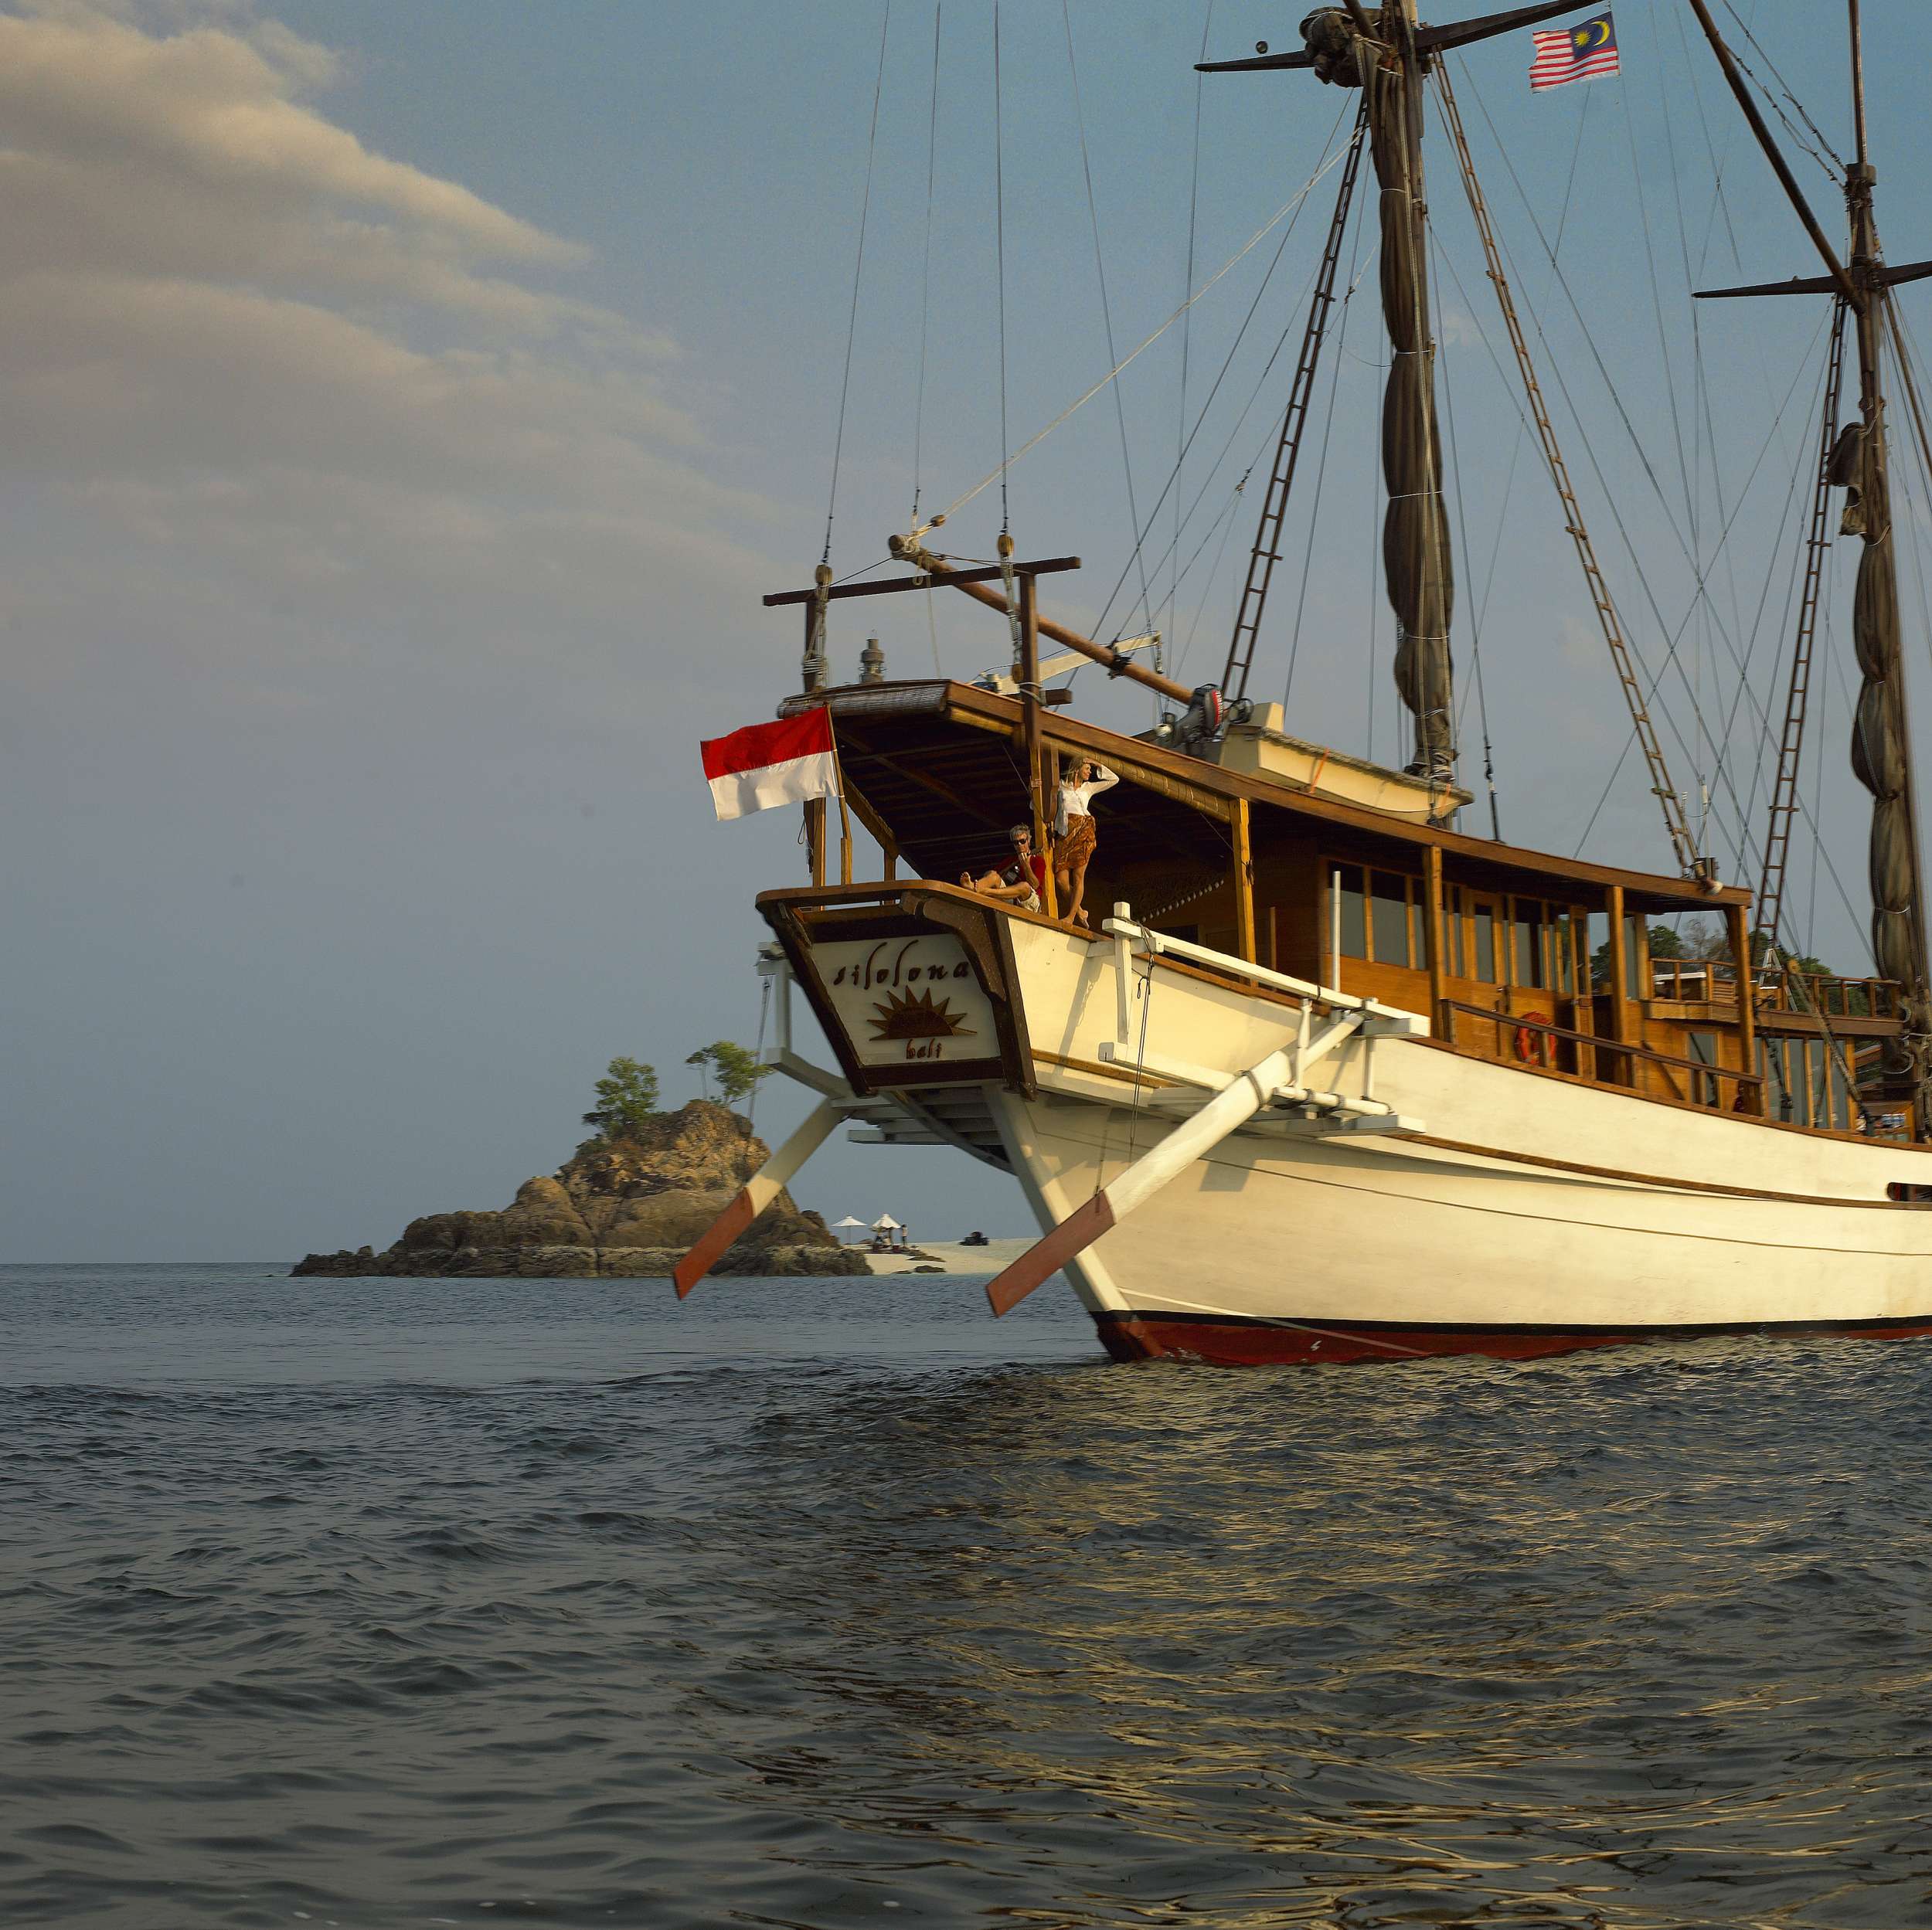 Silolona - Luxury yacht charter Thailand & Boat hire in SE Asia 2